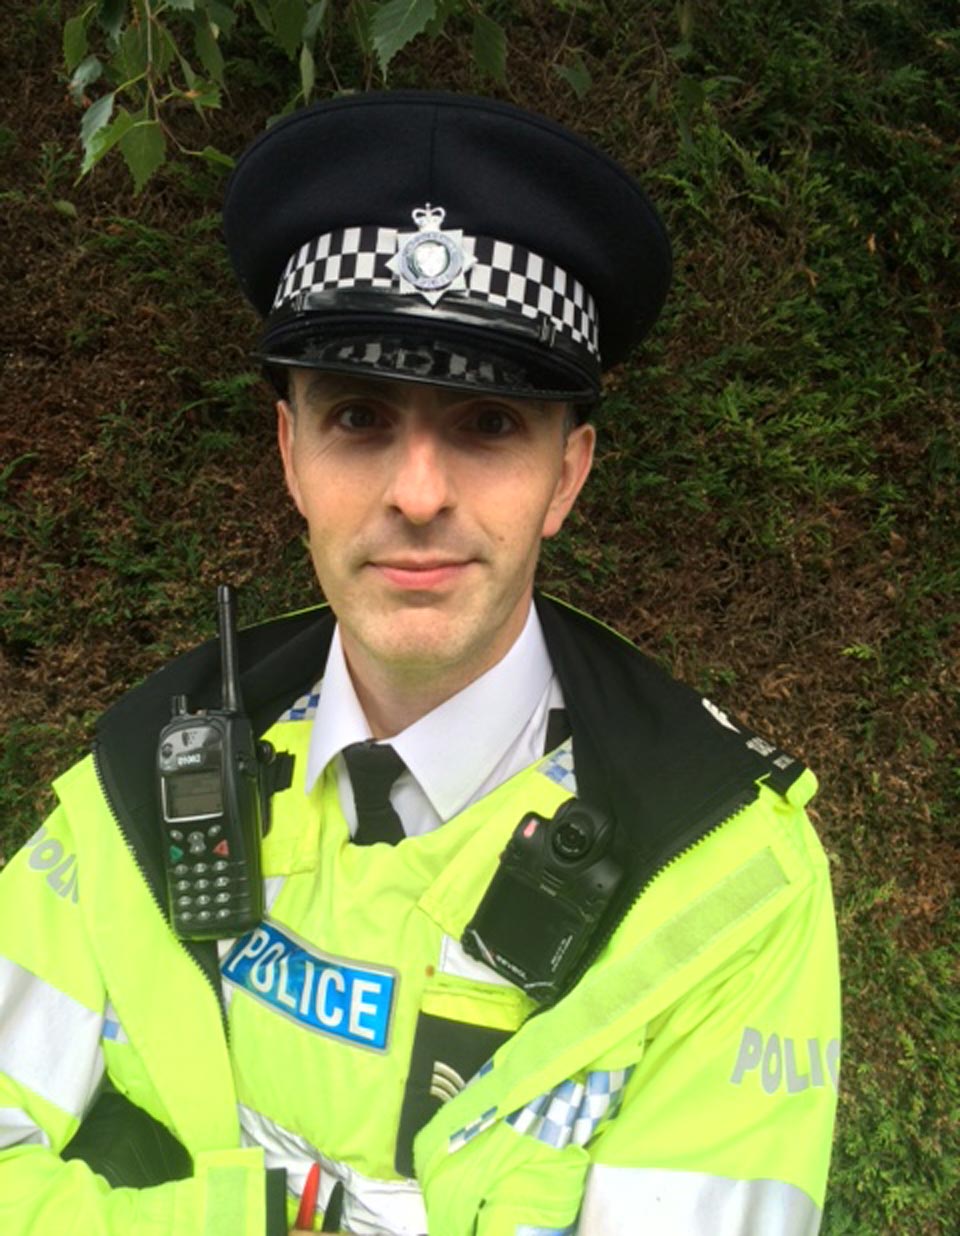 Lincoolnshire Police lead for body worn video, Sergeant Gareth Boxall showcasing one of the new cameras